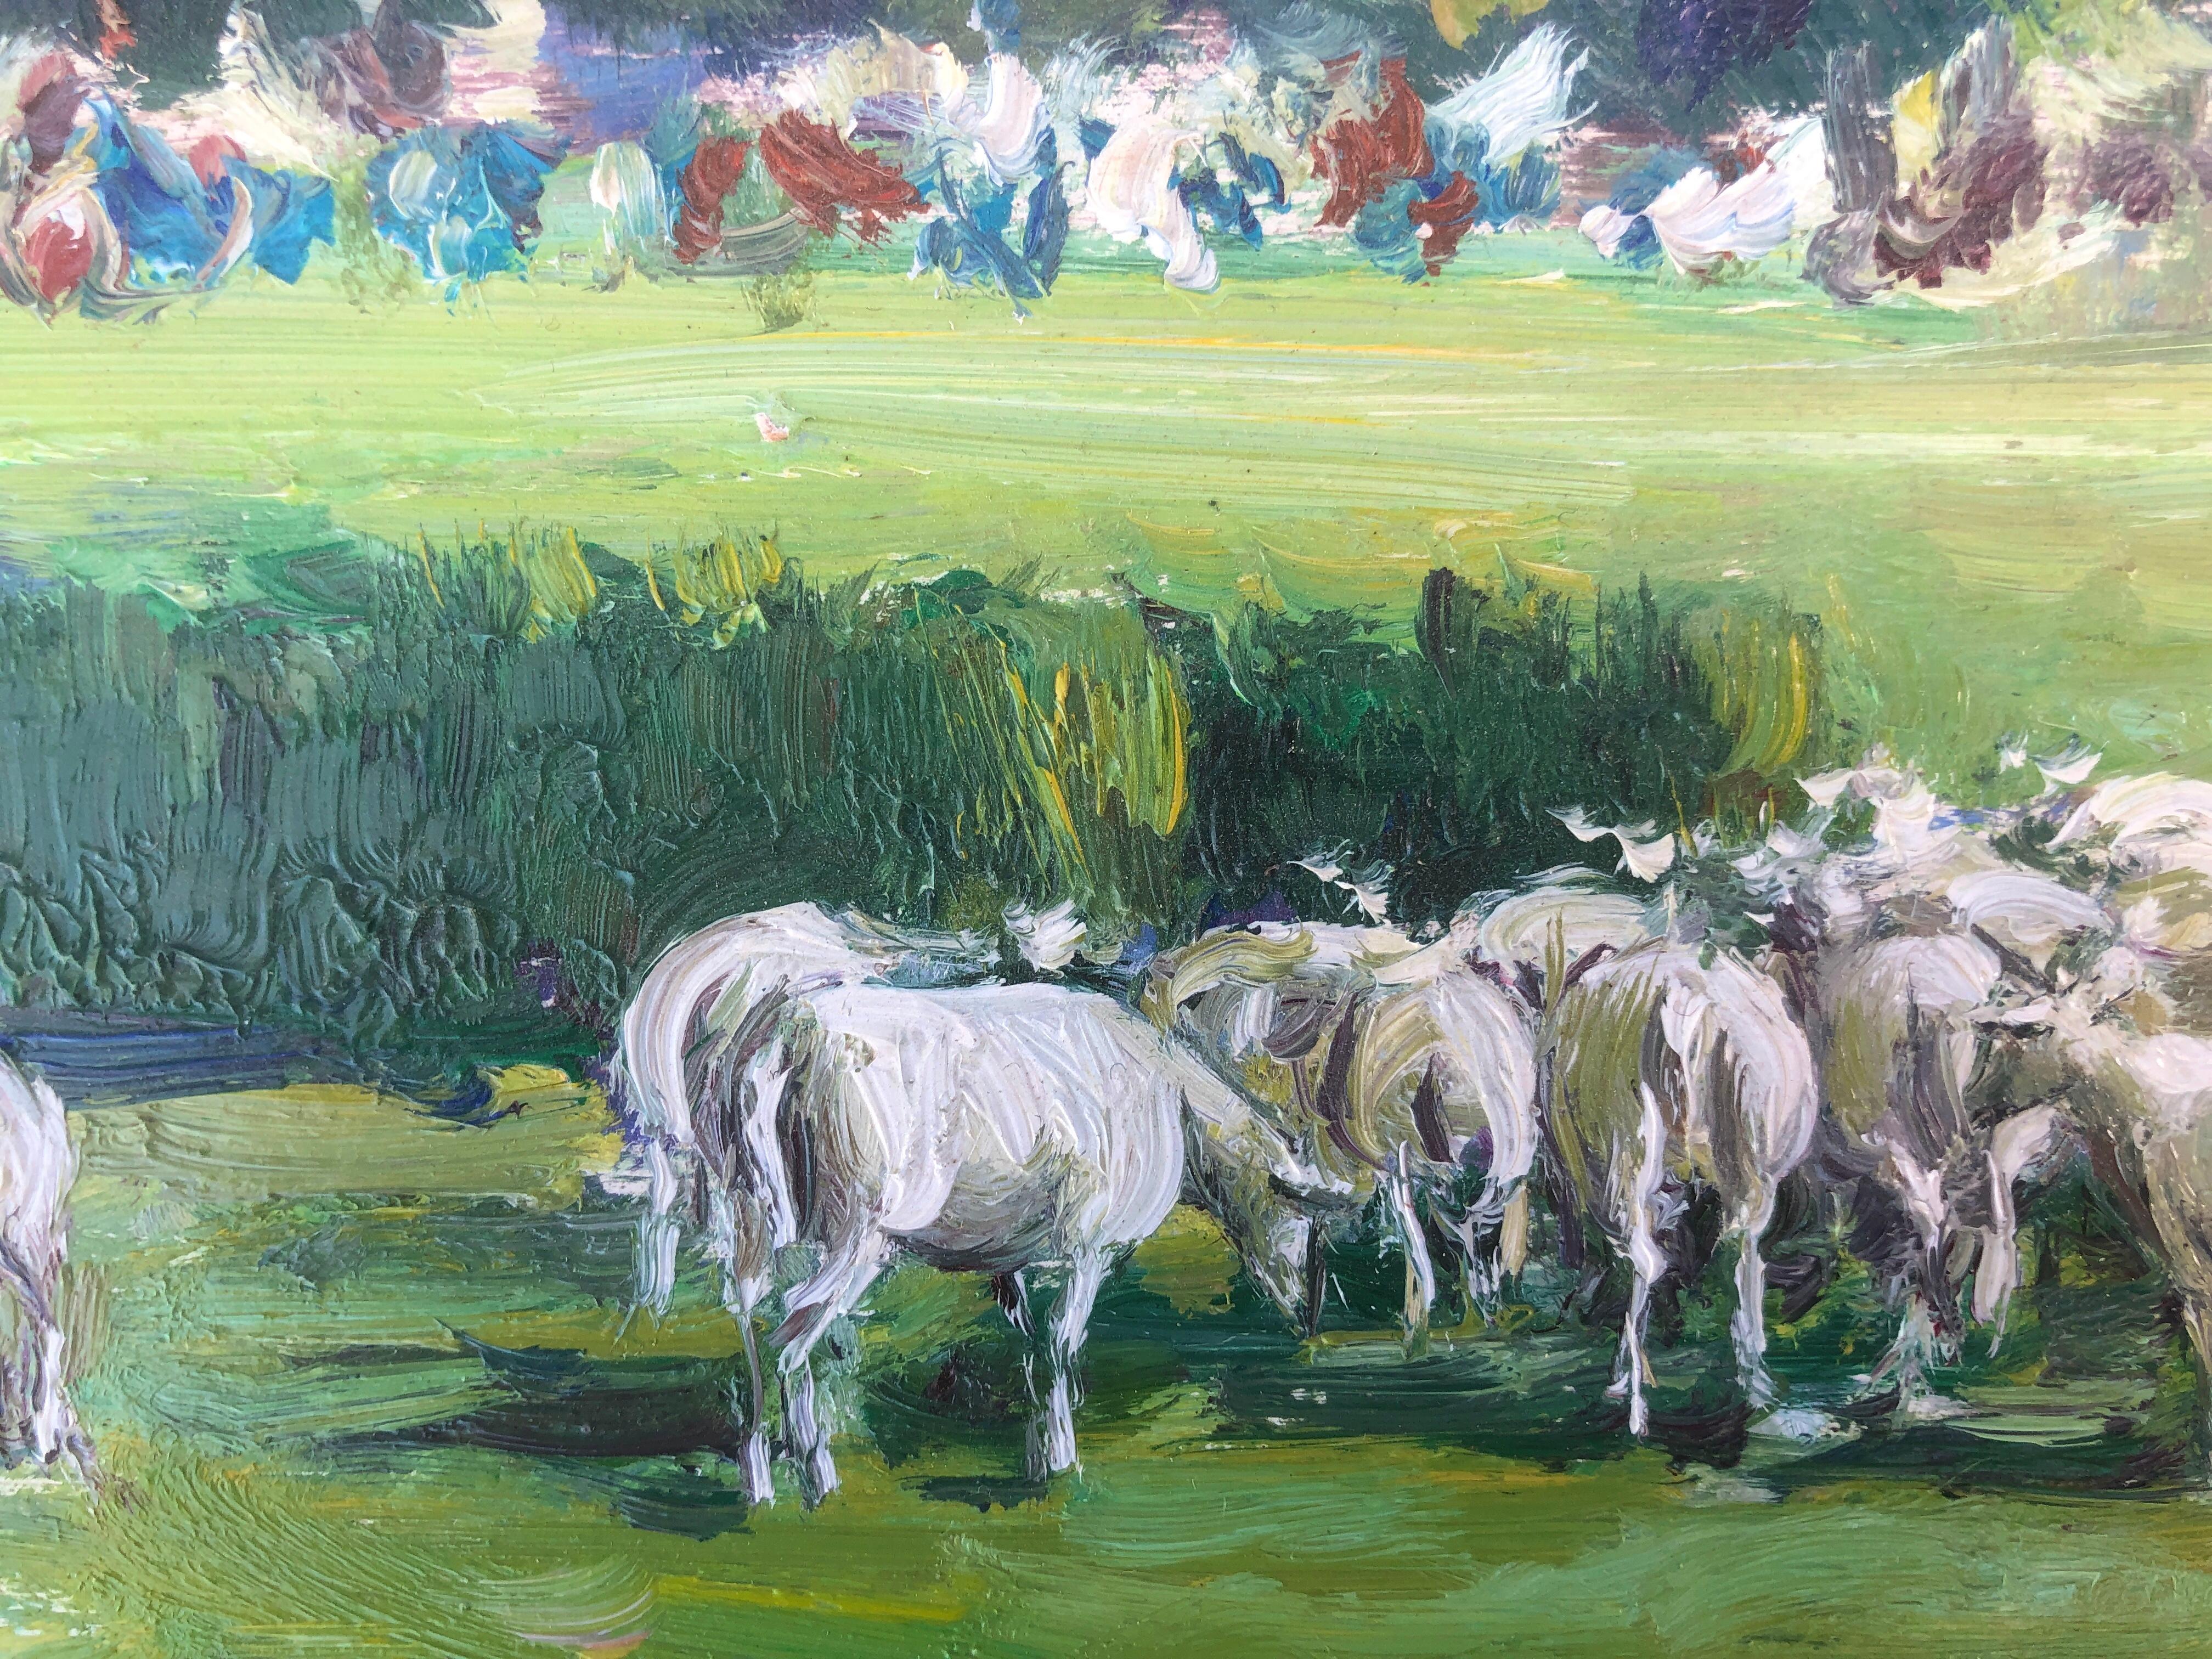 Juan Soler (1951) - Shepherding - Oil on board
Canvas measures 19x33 cm.
Frame measures 41x55 cm.

He was born in 1951. Under the direction of the master Pedro Bermejo, he began his artistic career, quickly highlighting and observing in his works an